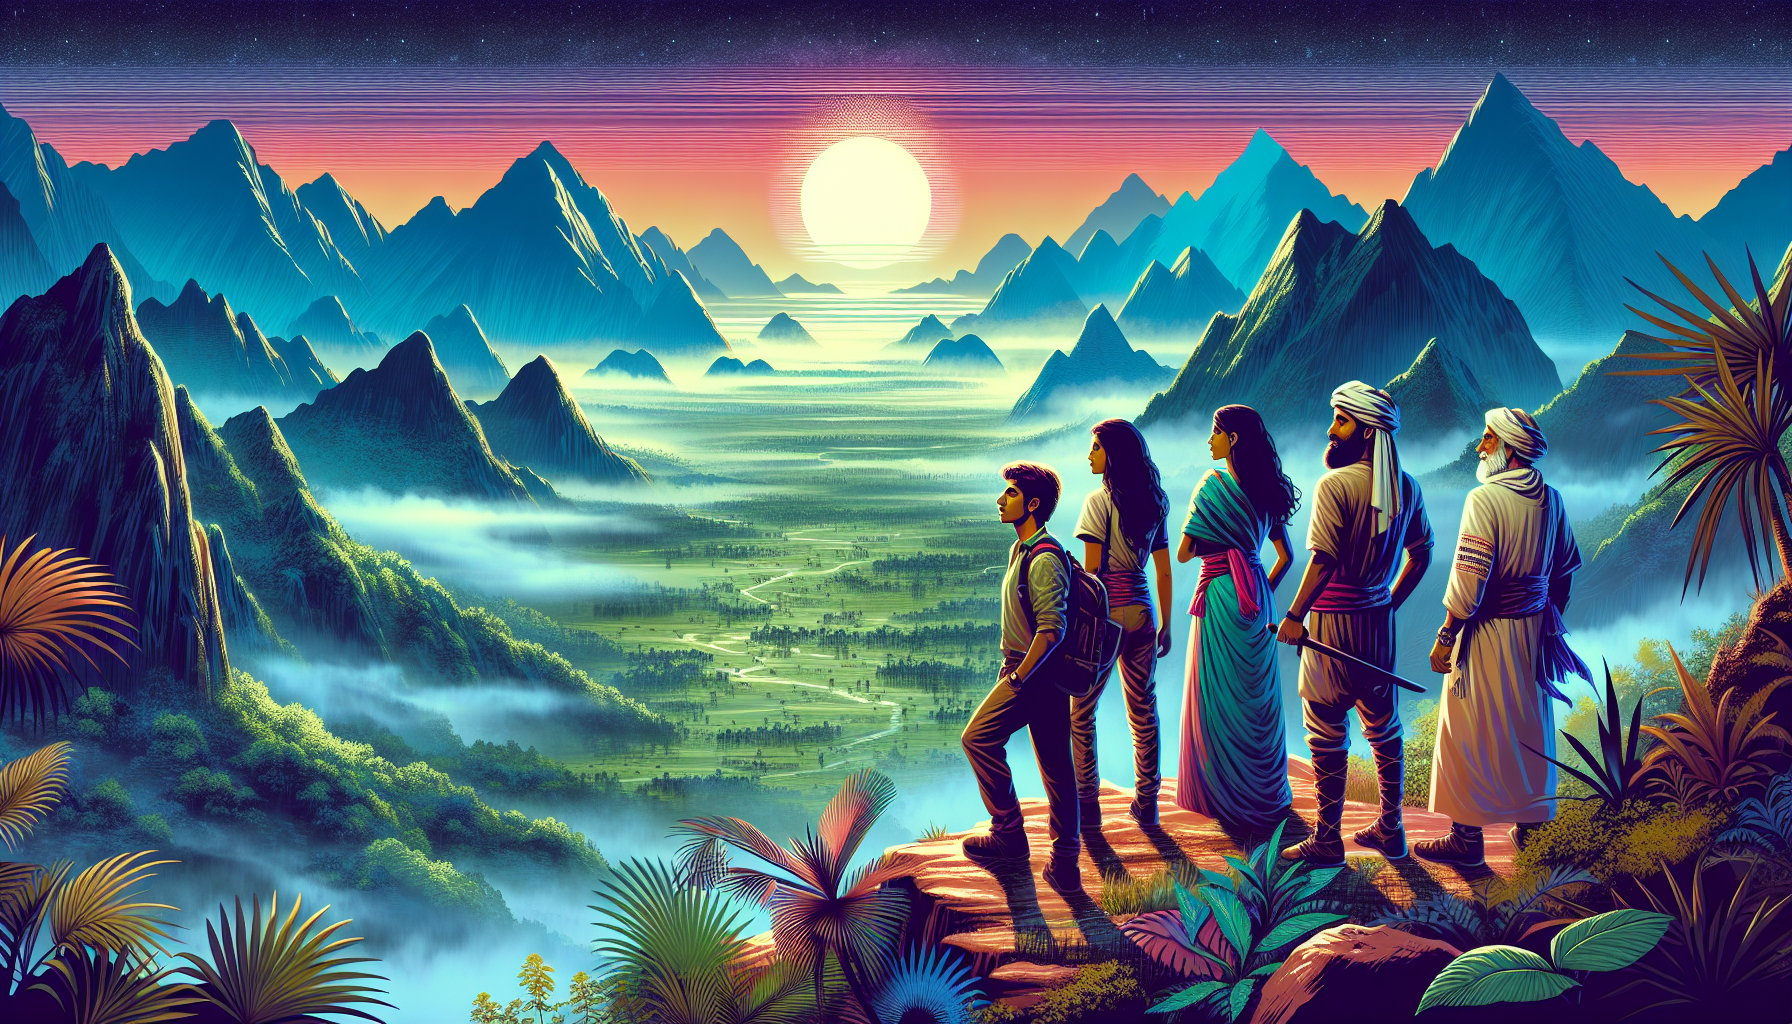 An artist's vibrant interpretation of a scene from a fictional adventure movie, featuring a diverse group of explorers standing on a mist-covered mountain peak, overlooking a lush, undiscovered valley